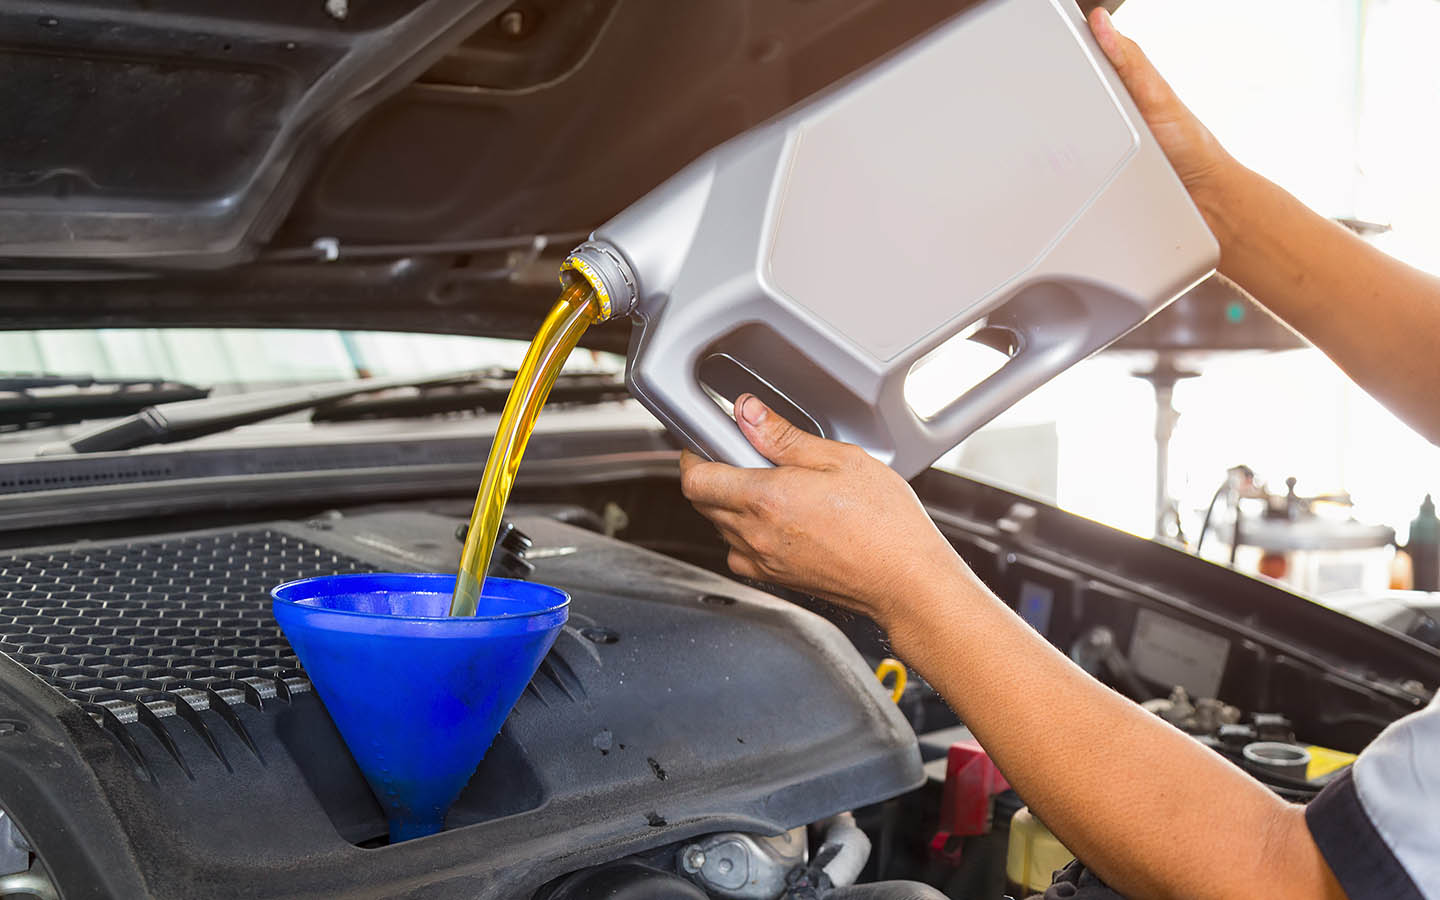 oil changing is one of the diy car repairs for owners